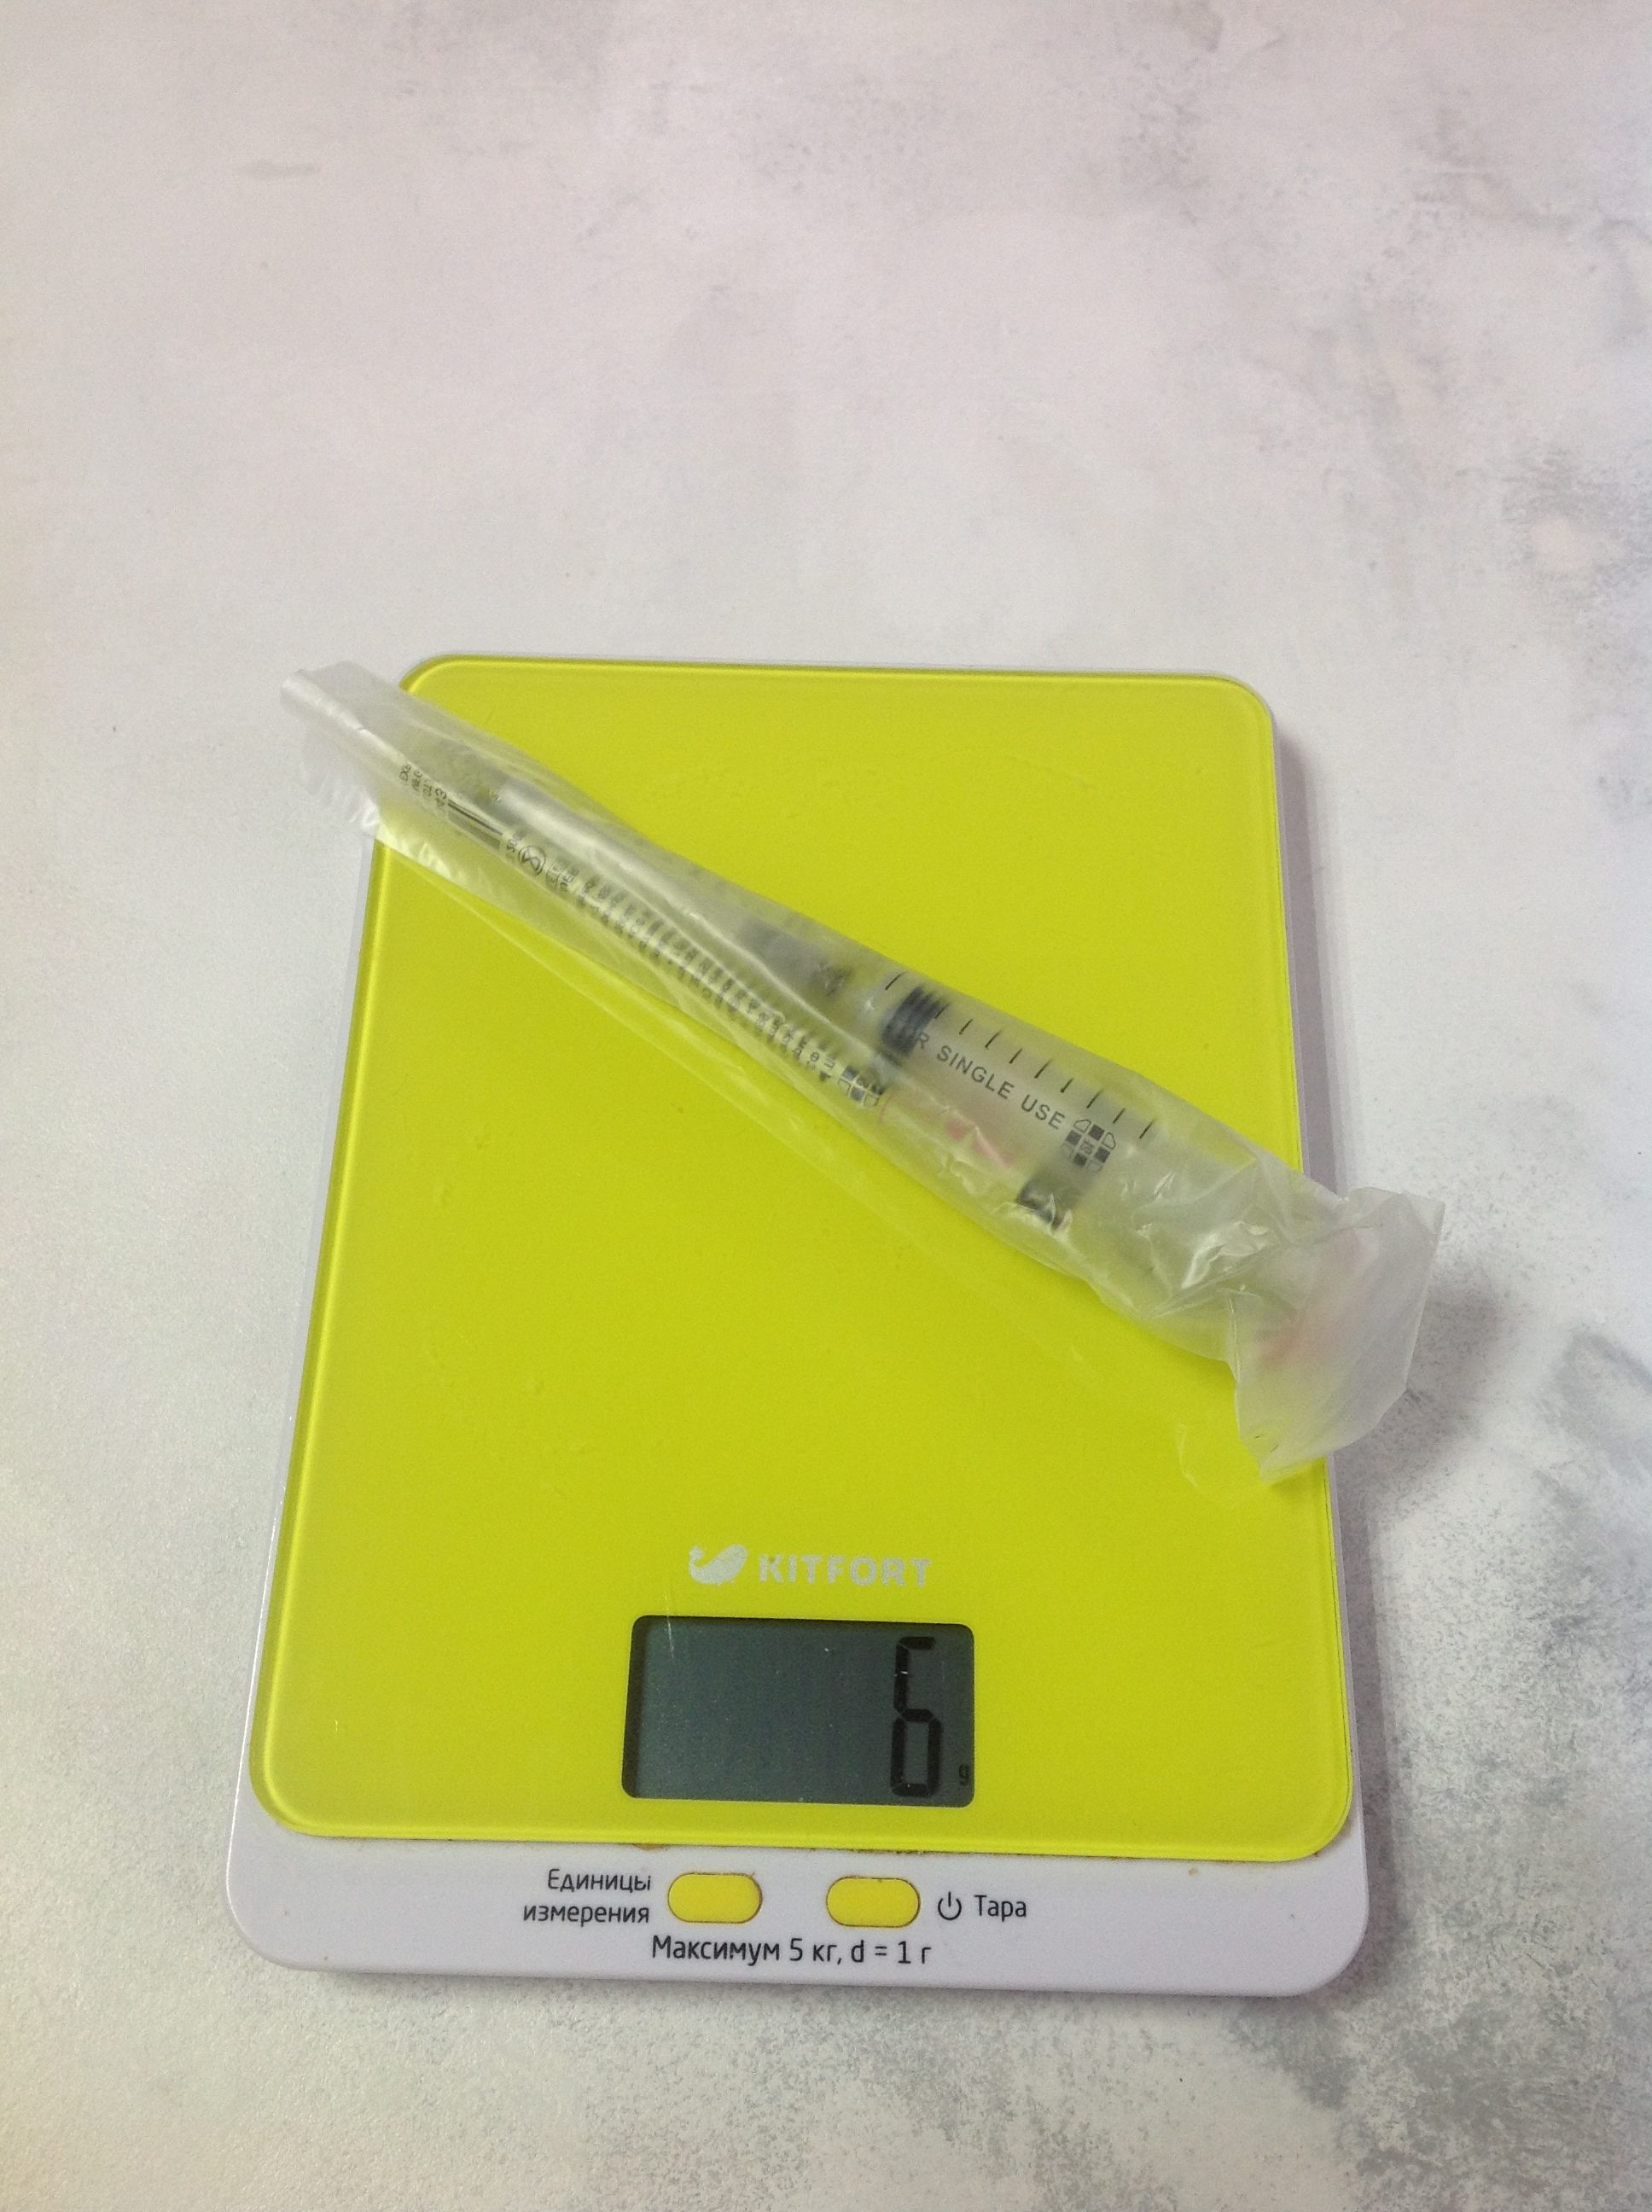 How much does a five-cc syringe weigh in a package?